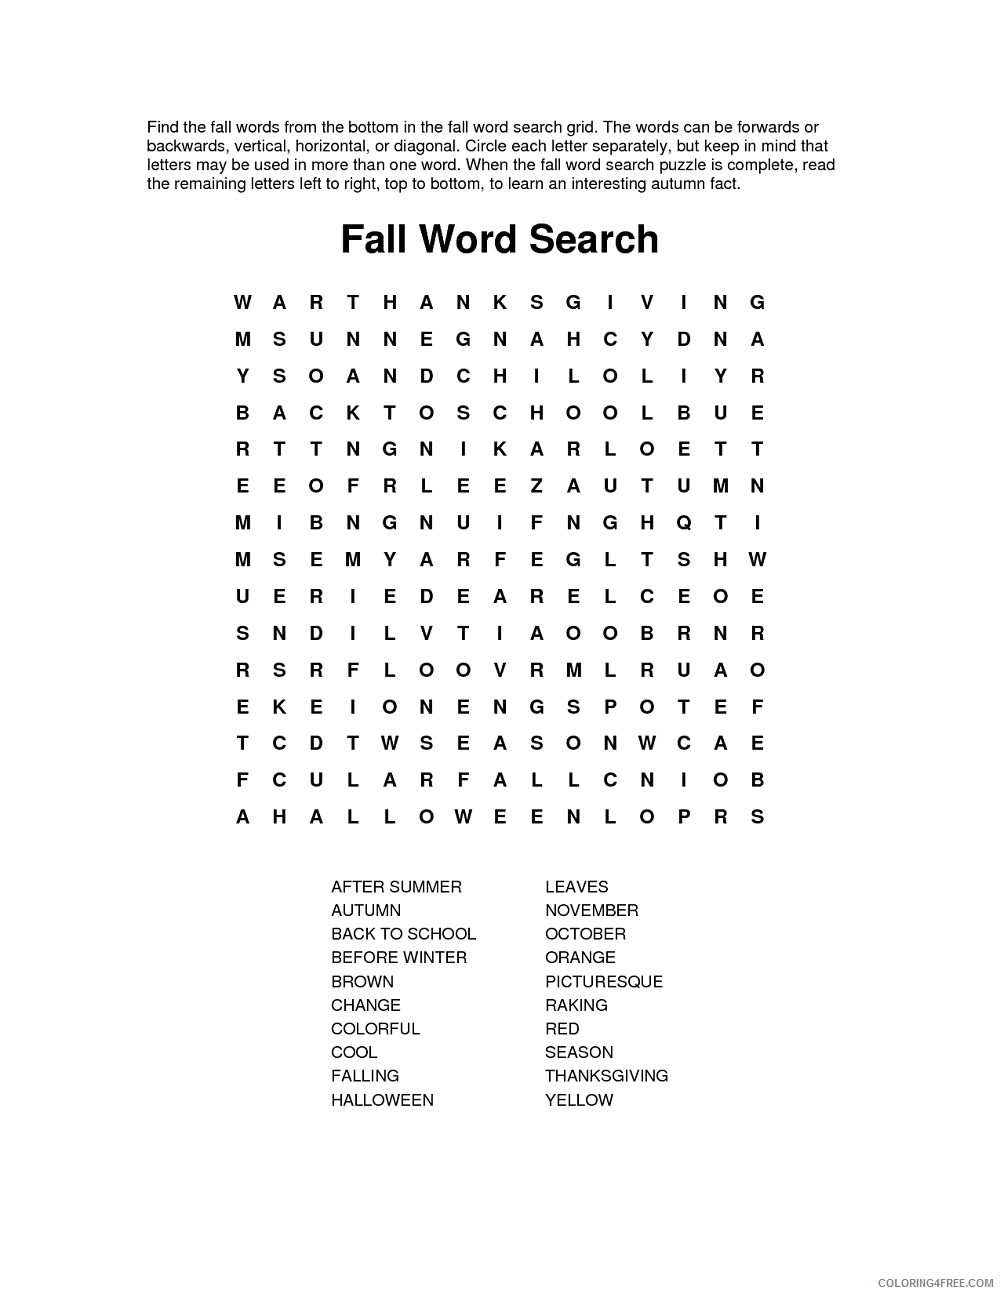 Word Searches Coloring Pages Educational Fall Word Search Printable 2020 2110 Coloring4free